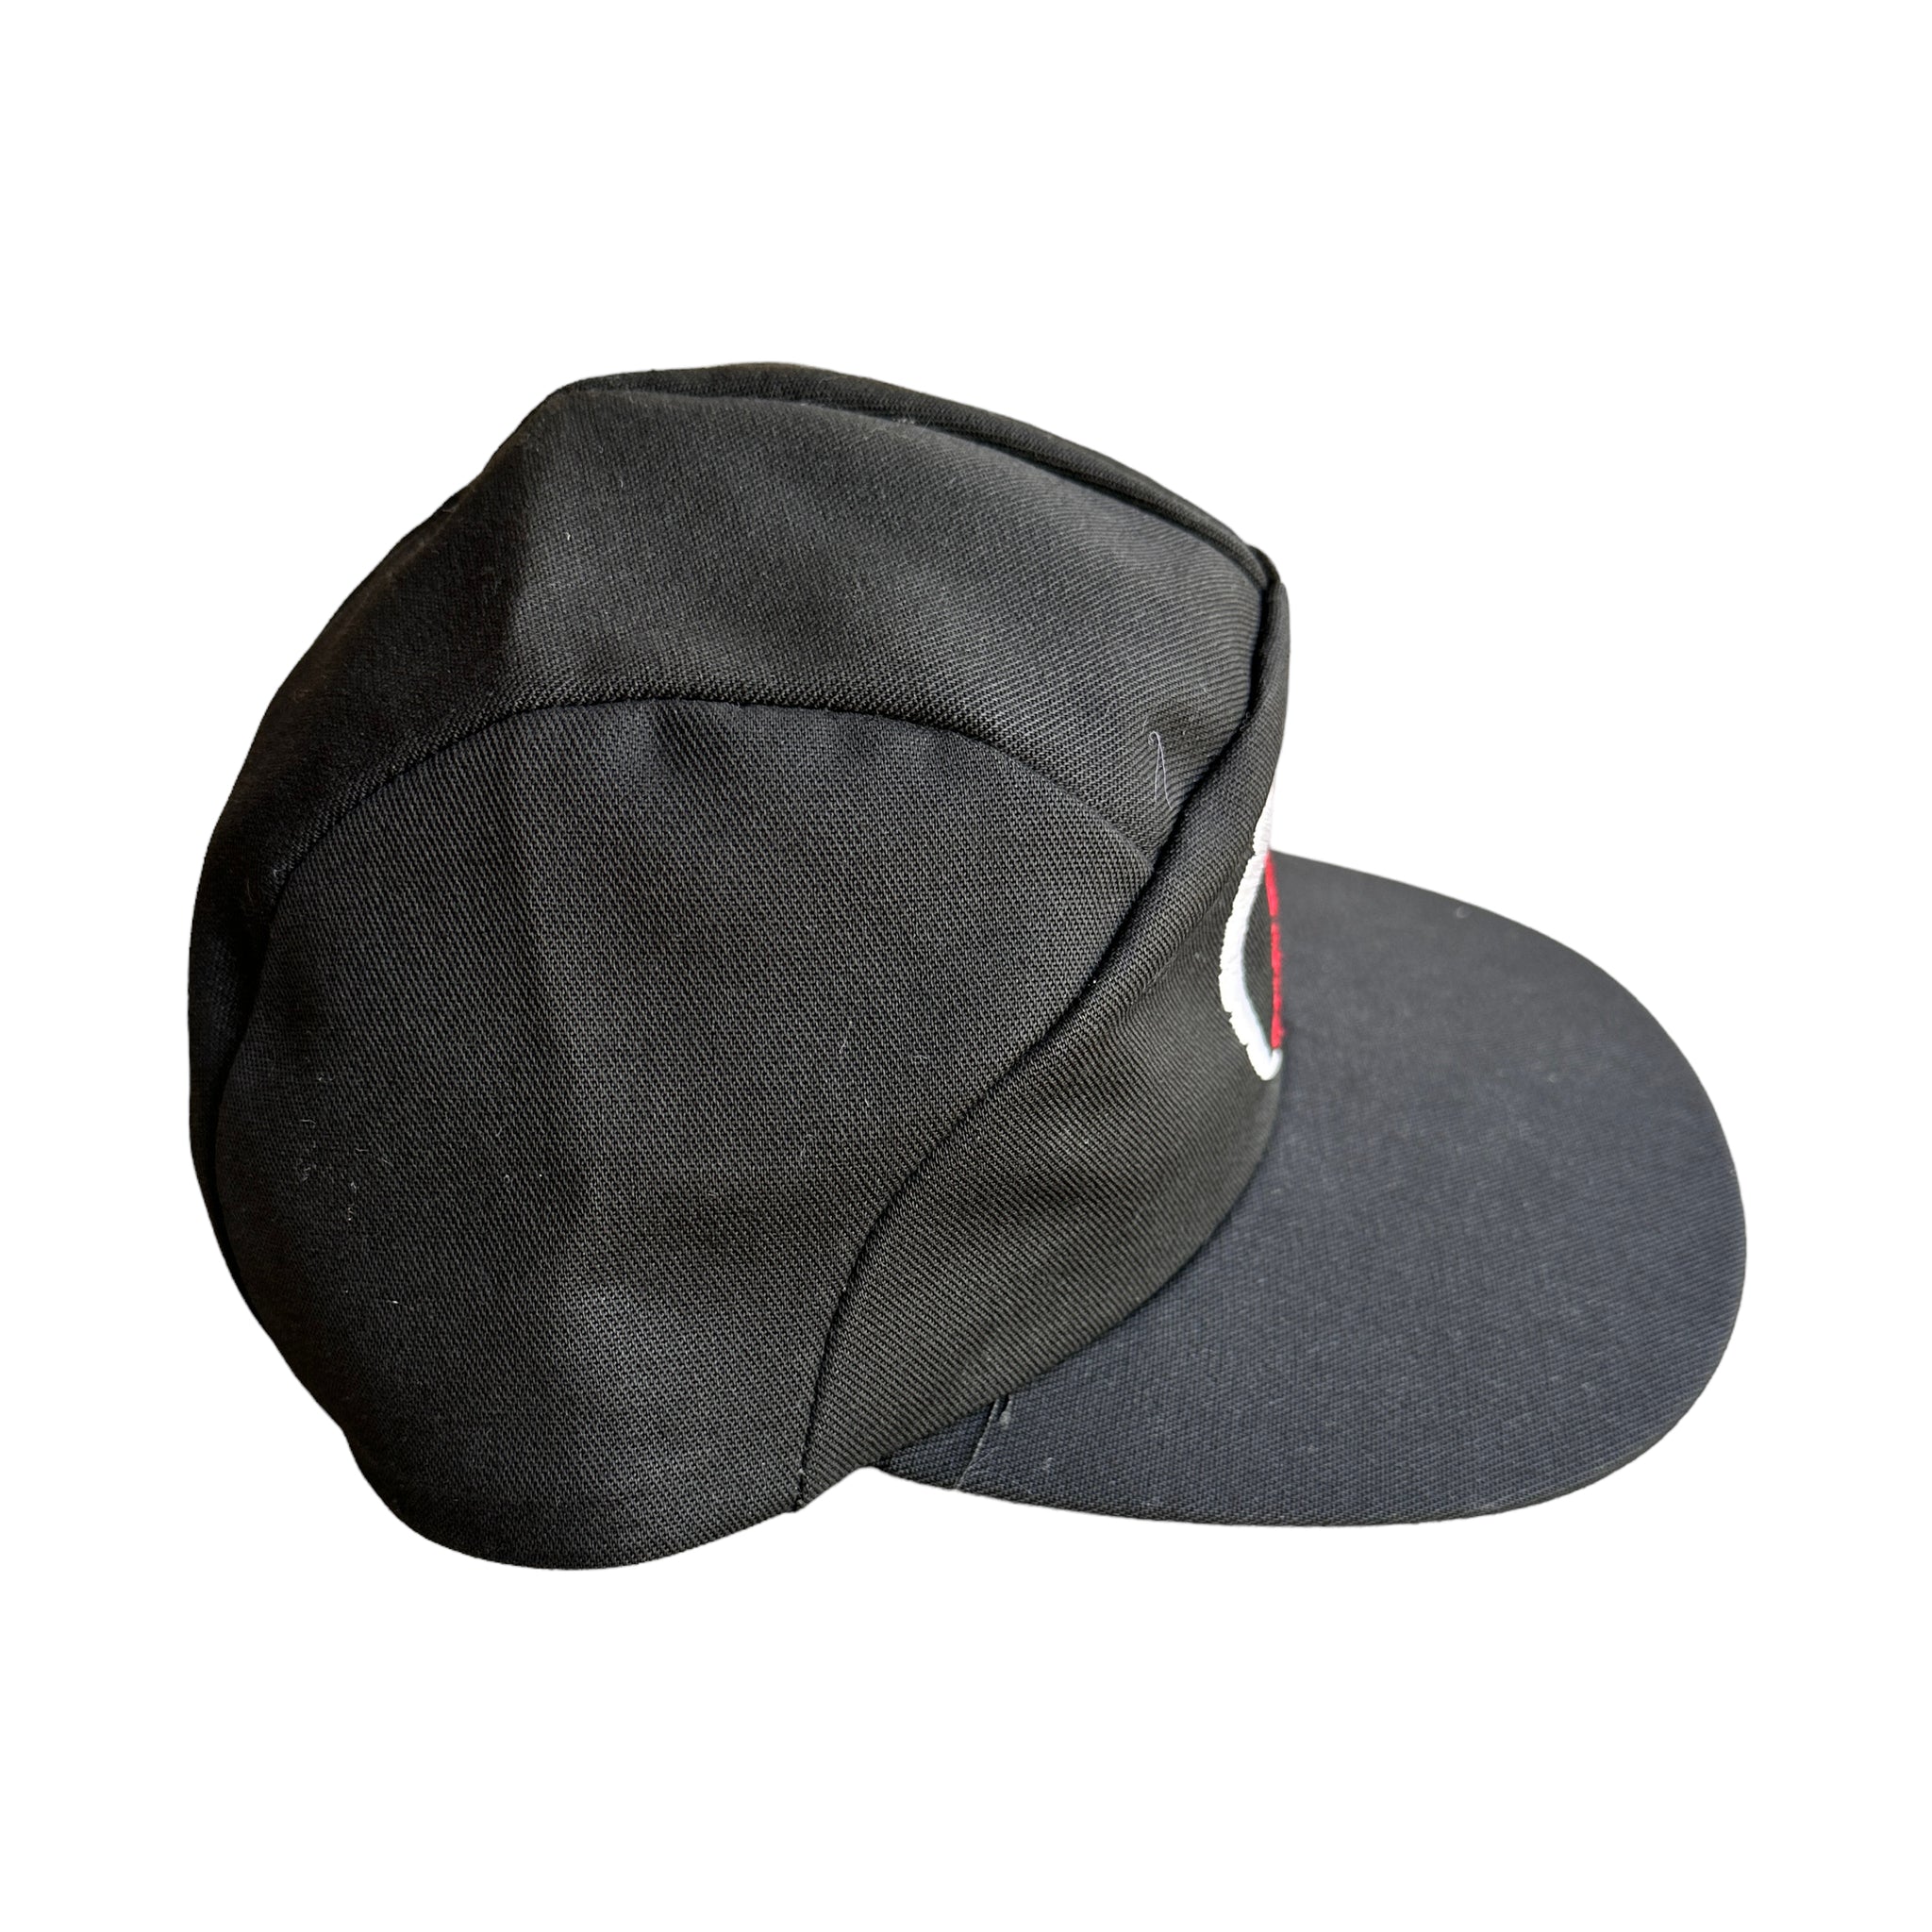 80s Concrete cutting hat “helicopter pilot” fit